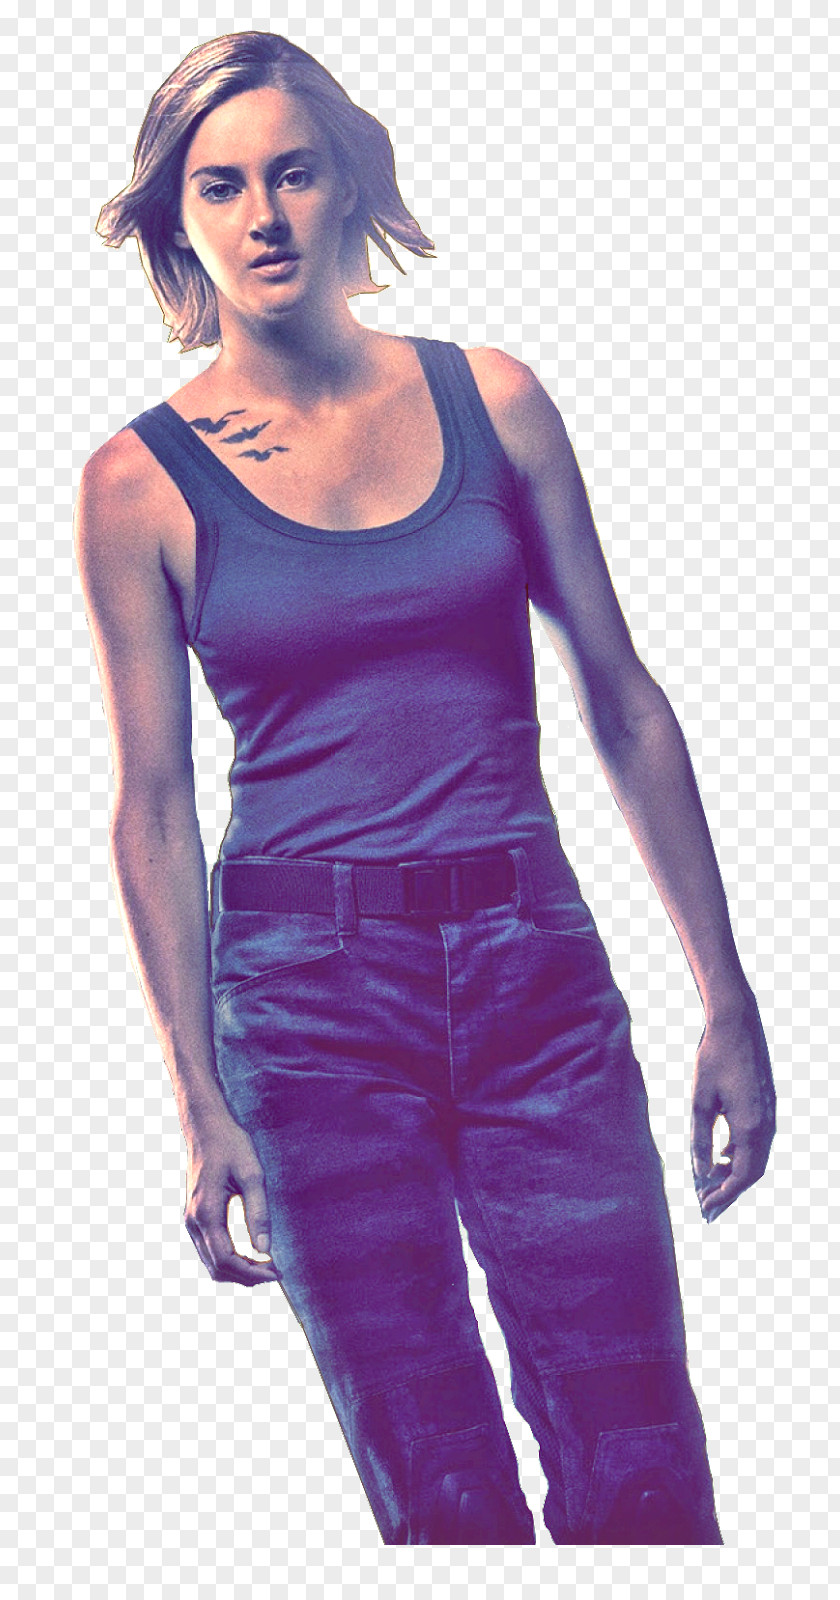 Shailene Woodley The Divergent Series: Allegiant Clothing Sleeve Fashion Magenta PNG